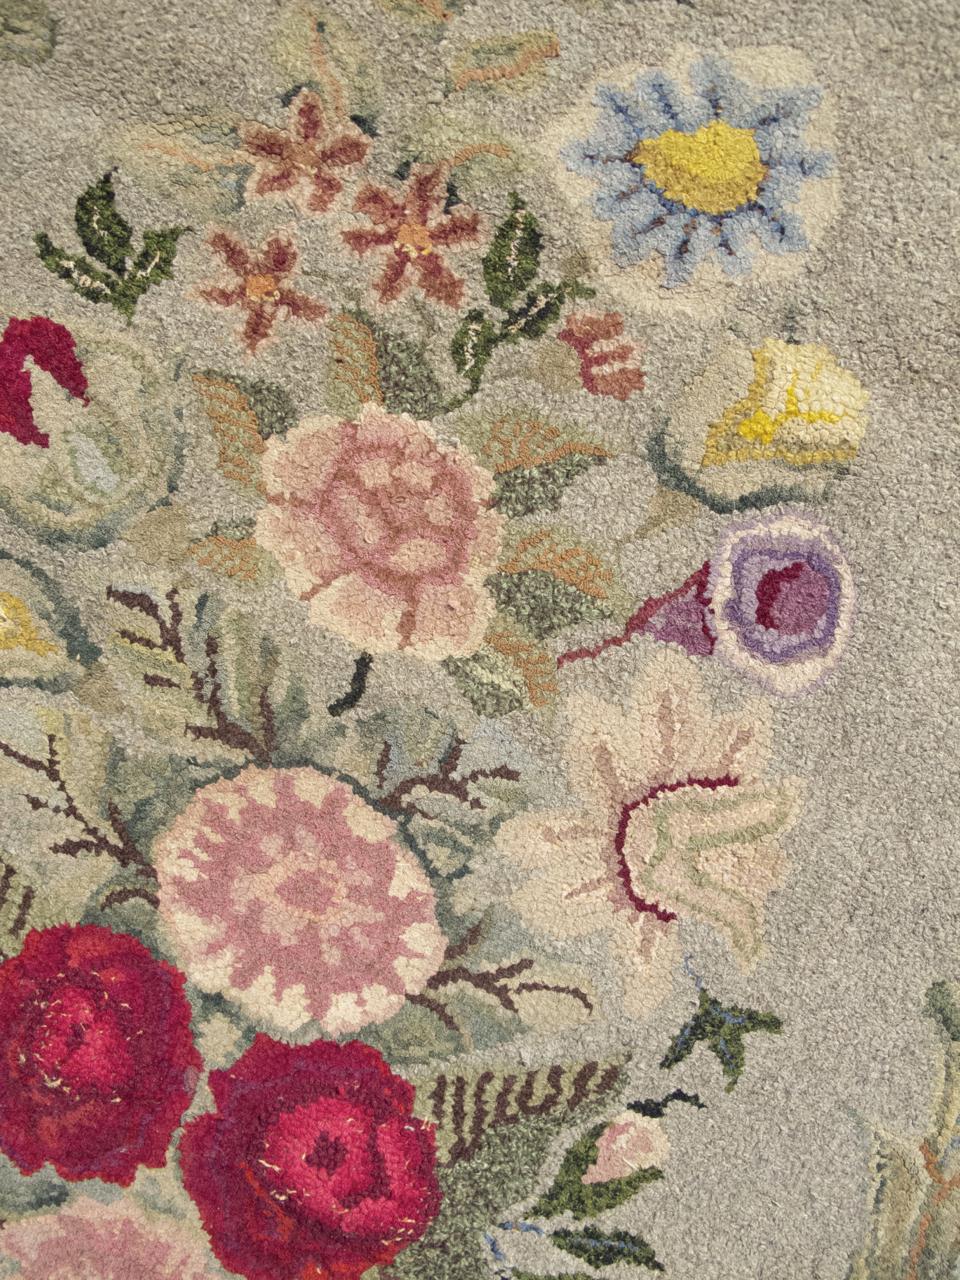 American Hooked Rug, Early 20th Century

Additional Information:
Dimensions: 2'7